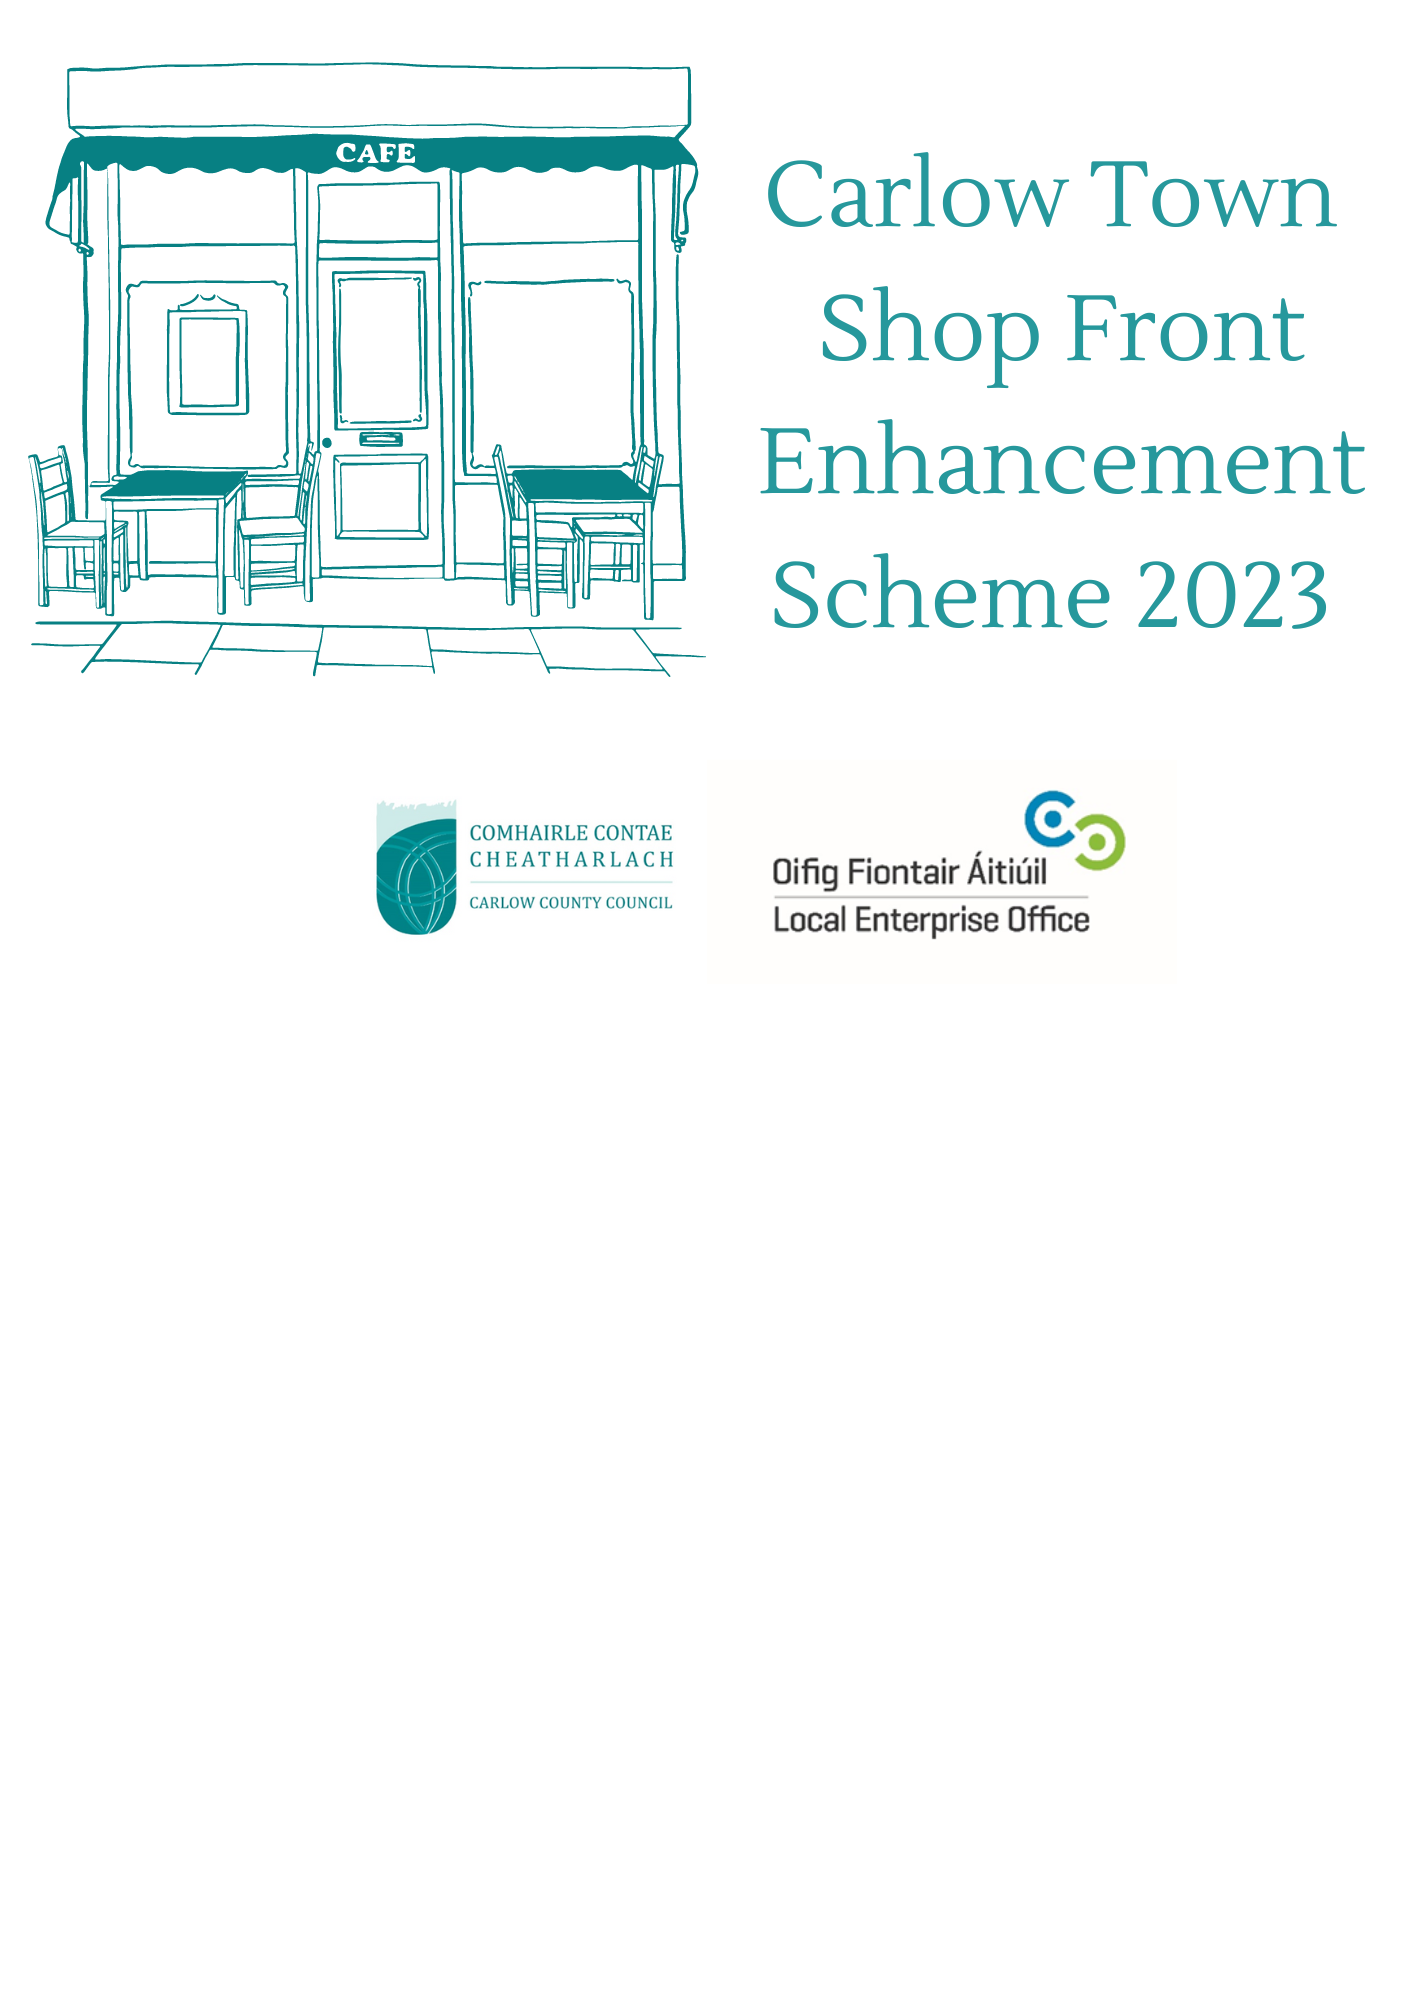 Carlow County Council’s Shop Front Enhancement Scheme 2023 for Carlow Town Launched